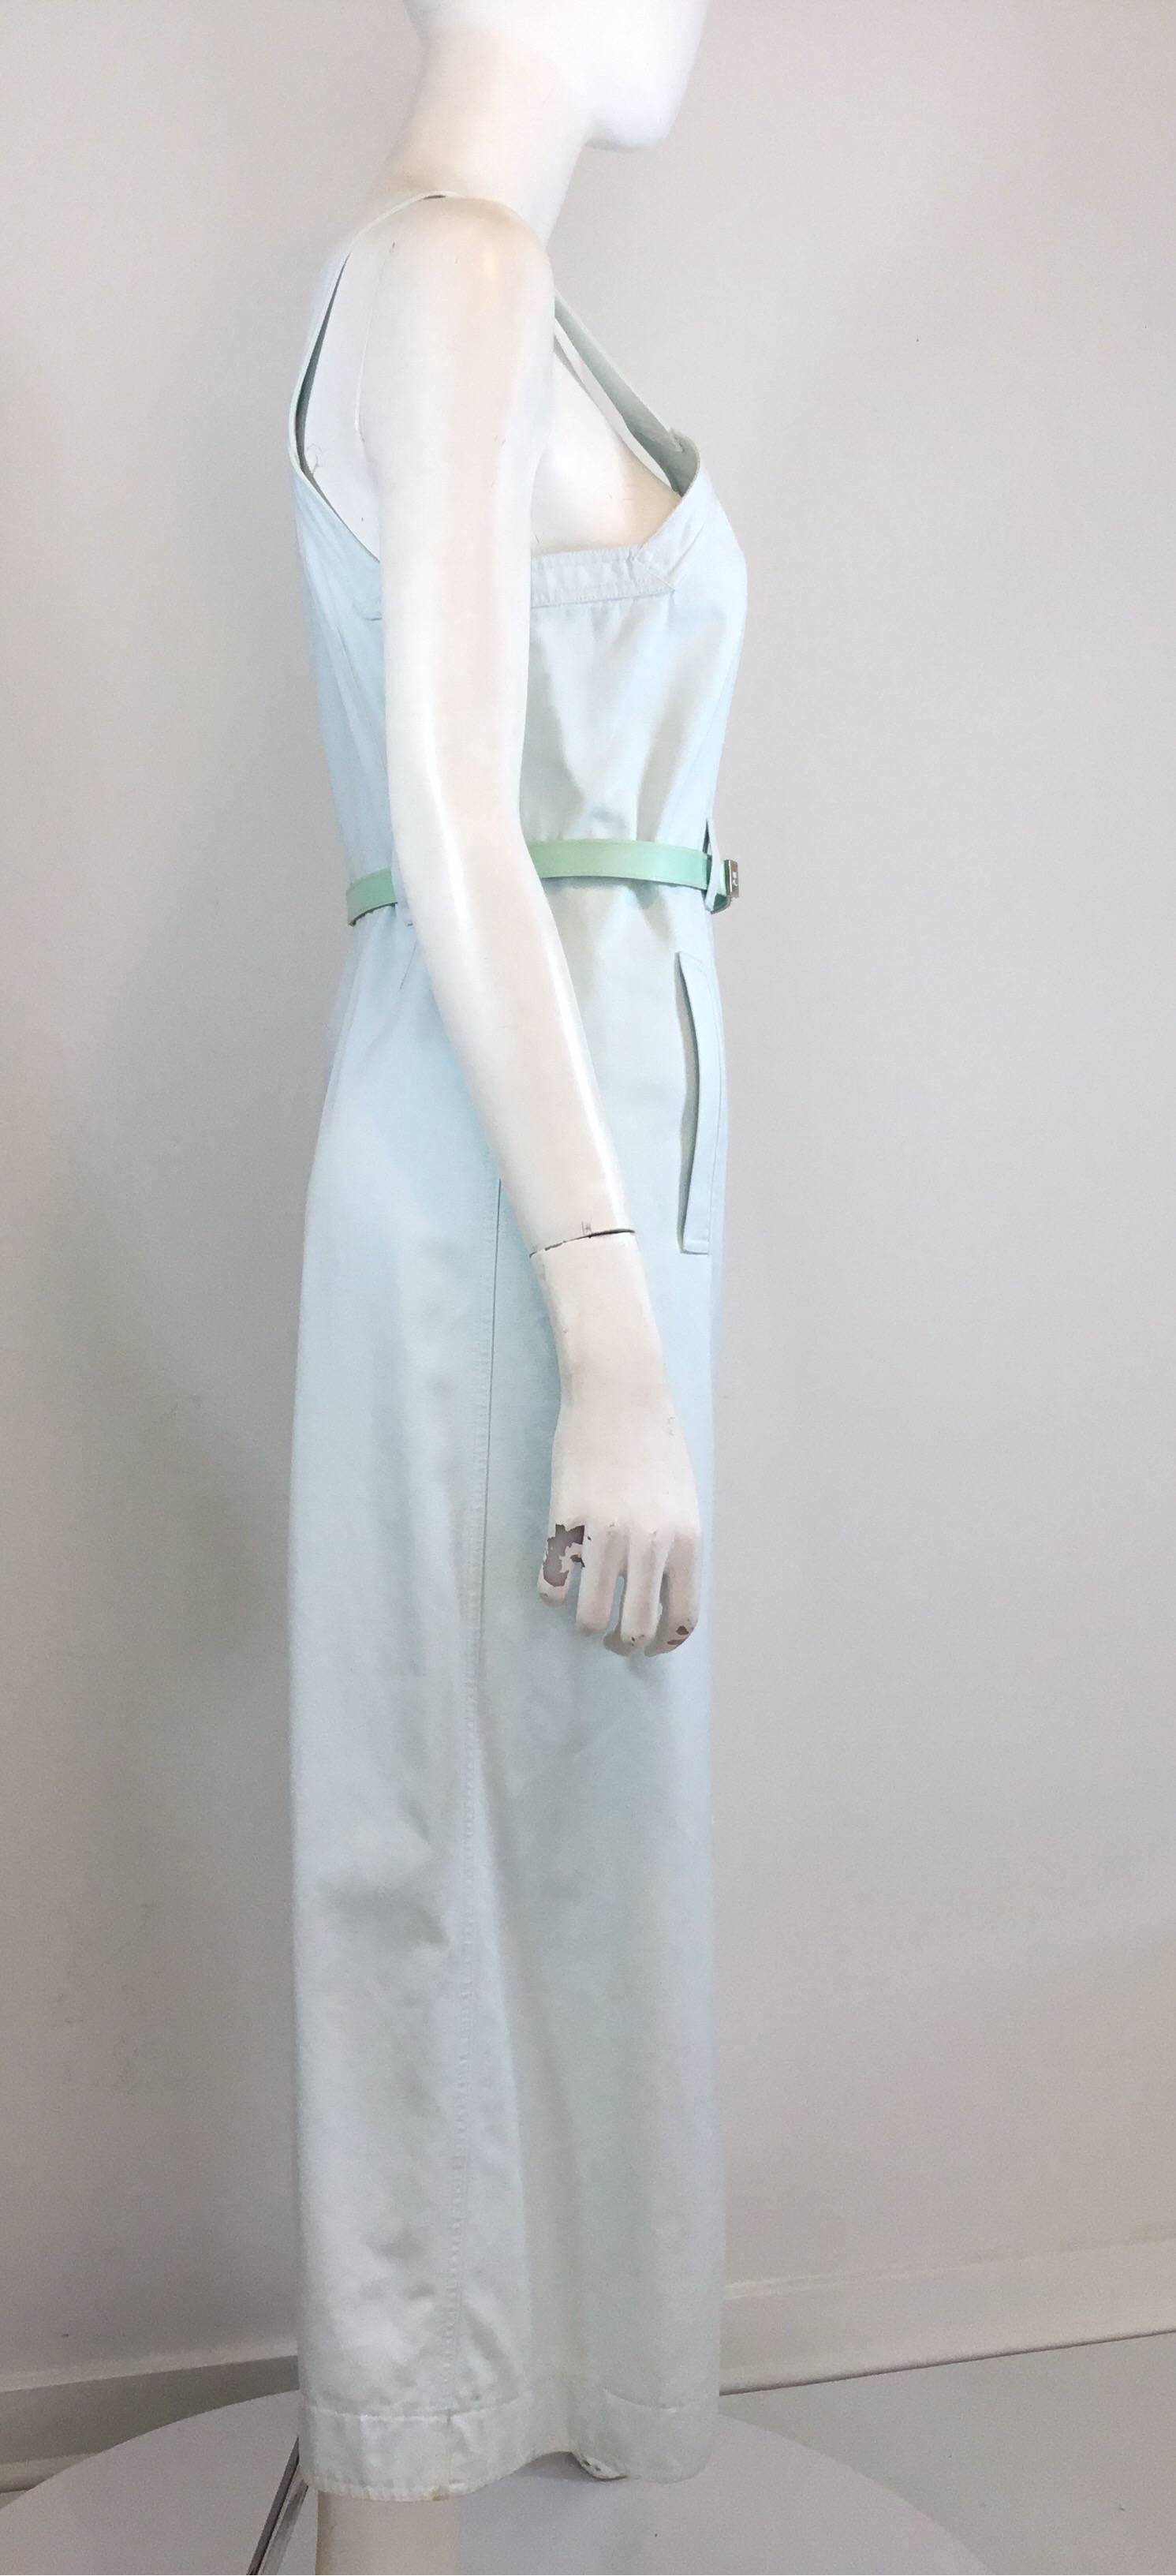 Courreges vintage cotton dress in light blue with button and belted closures and pockets at the high waist. Dress is made of 100% cotton and made in France.

Measurements:
Bust- 35''
Waist- 30''
Hips- 35''
Length- 43.5''